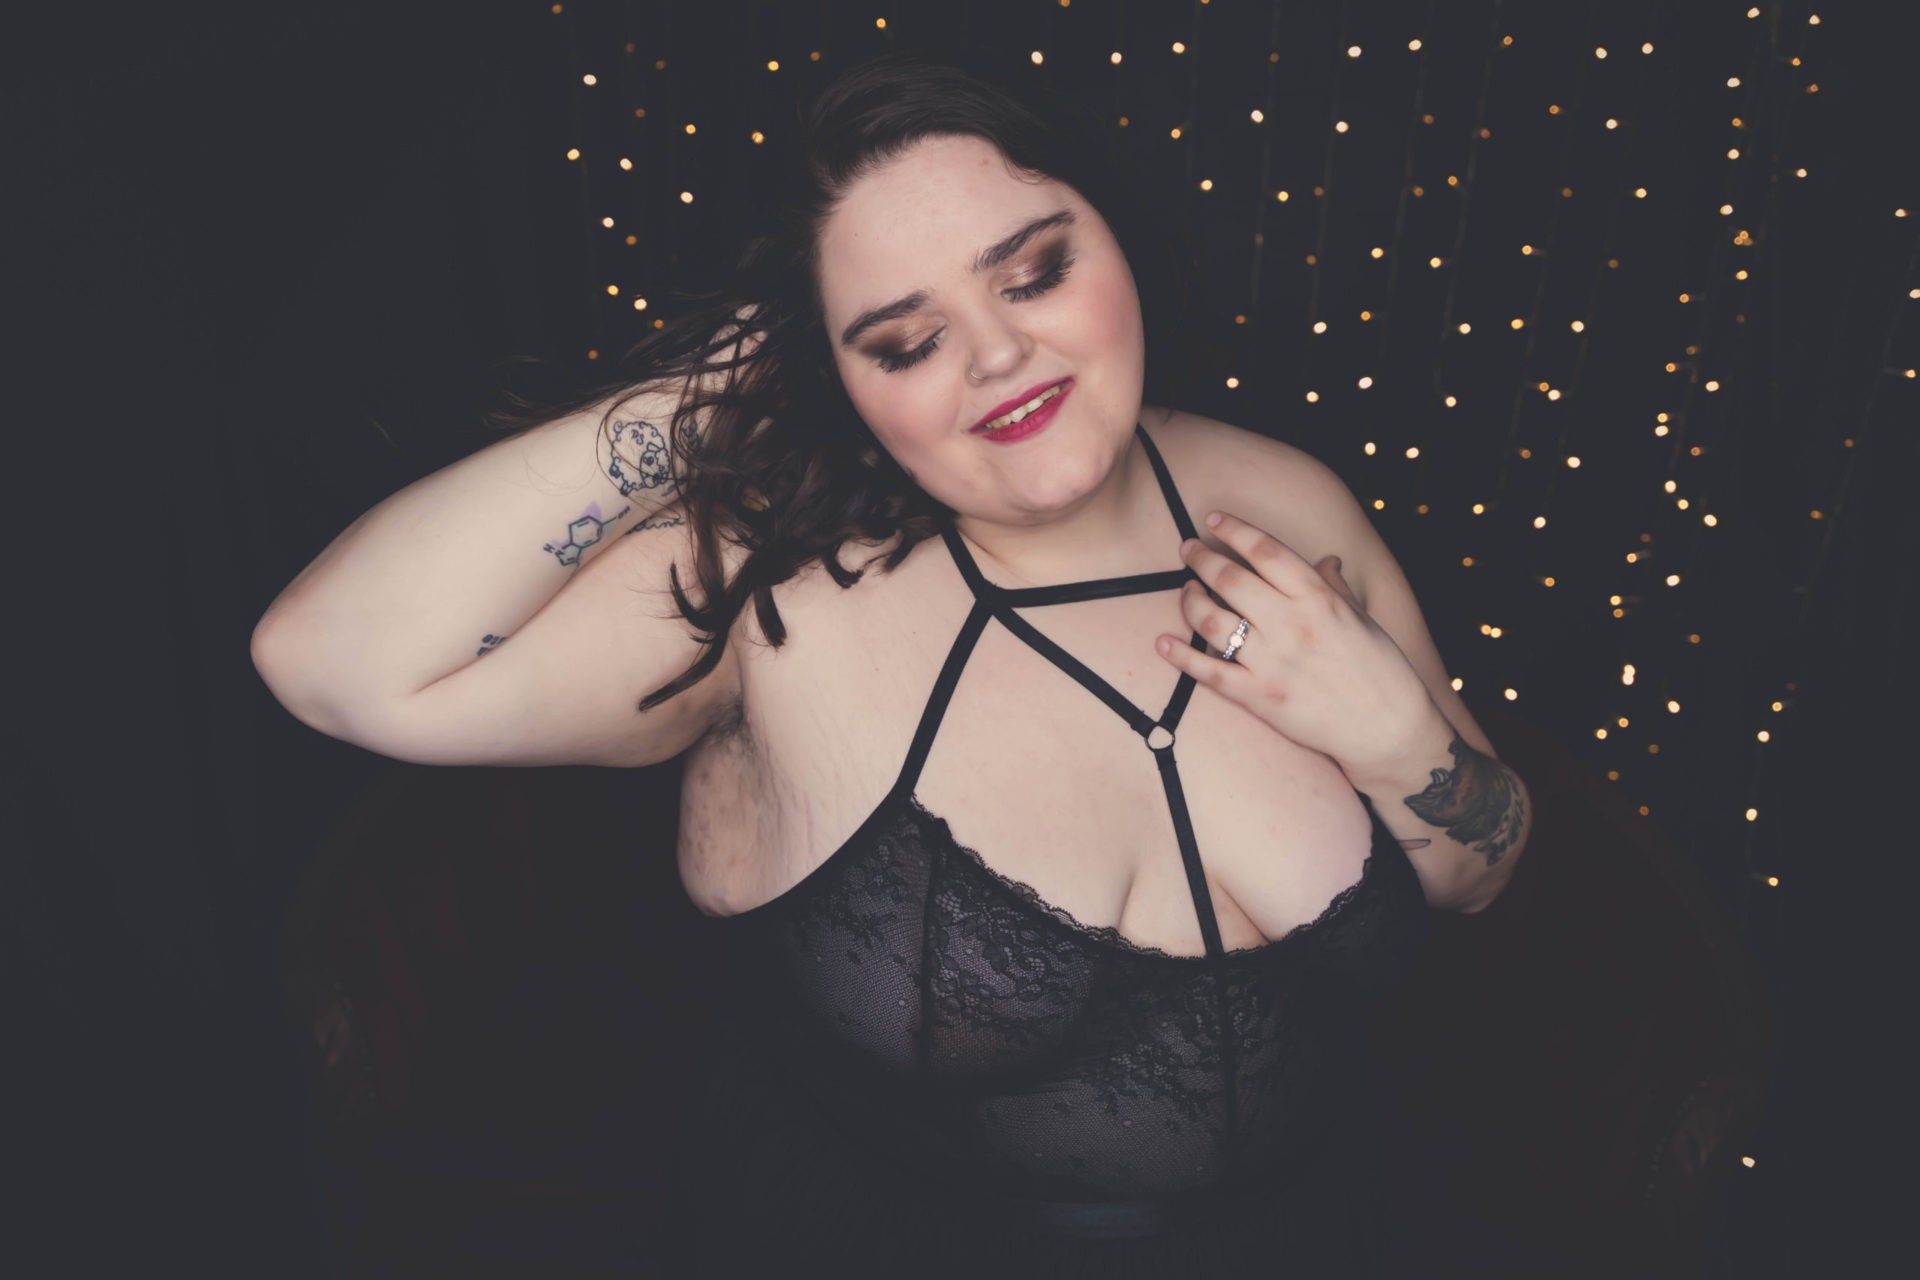 Woman with long dark hair, tattoos and scrappy lingerie stands with her eyes closed in front of twinkly lights.